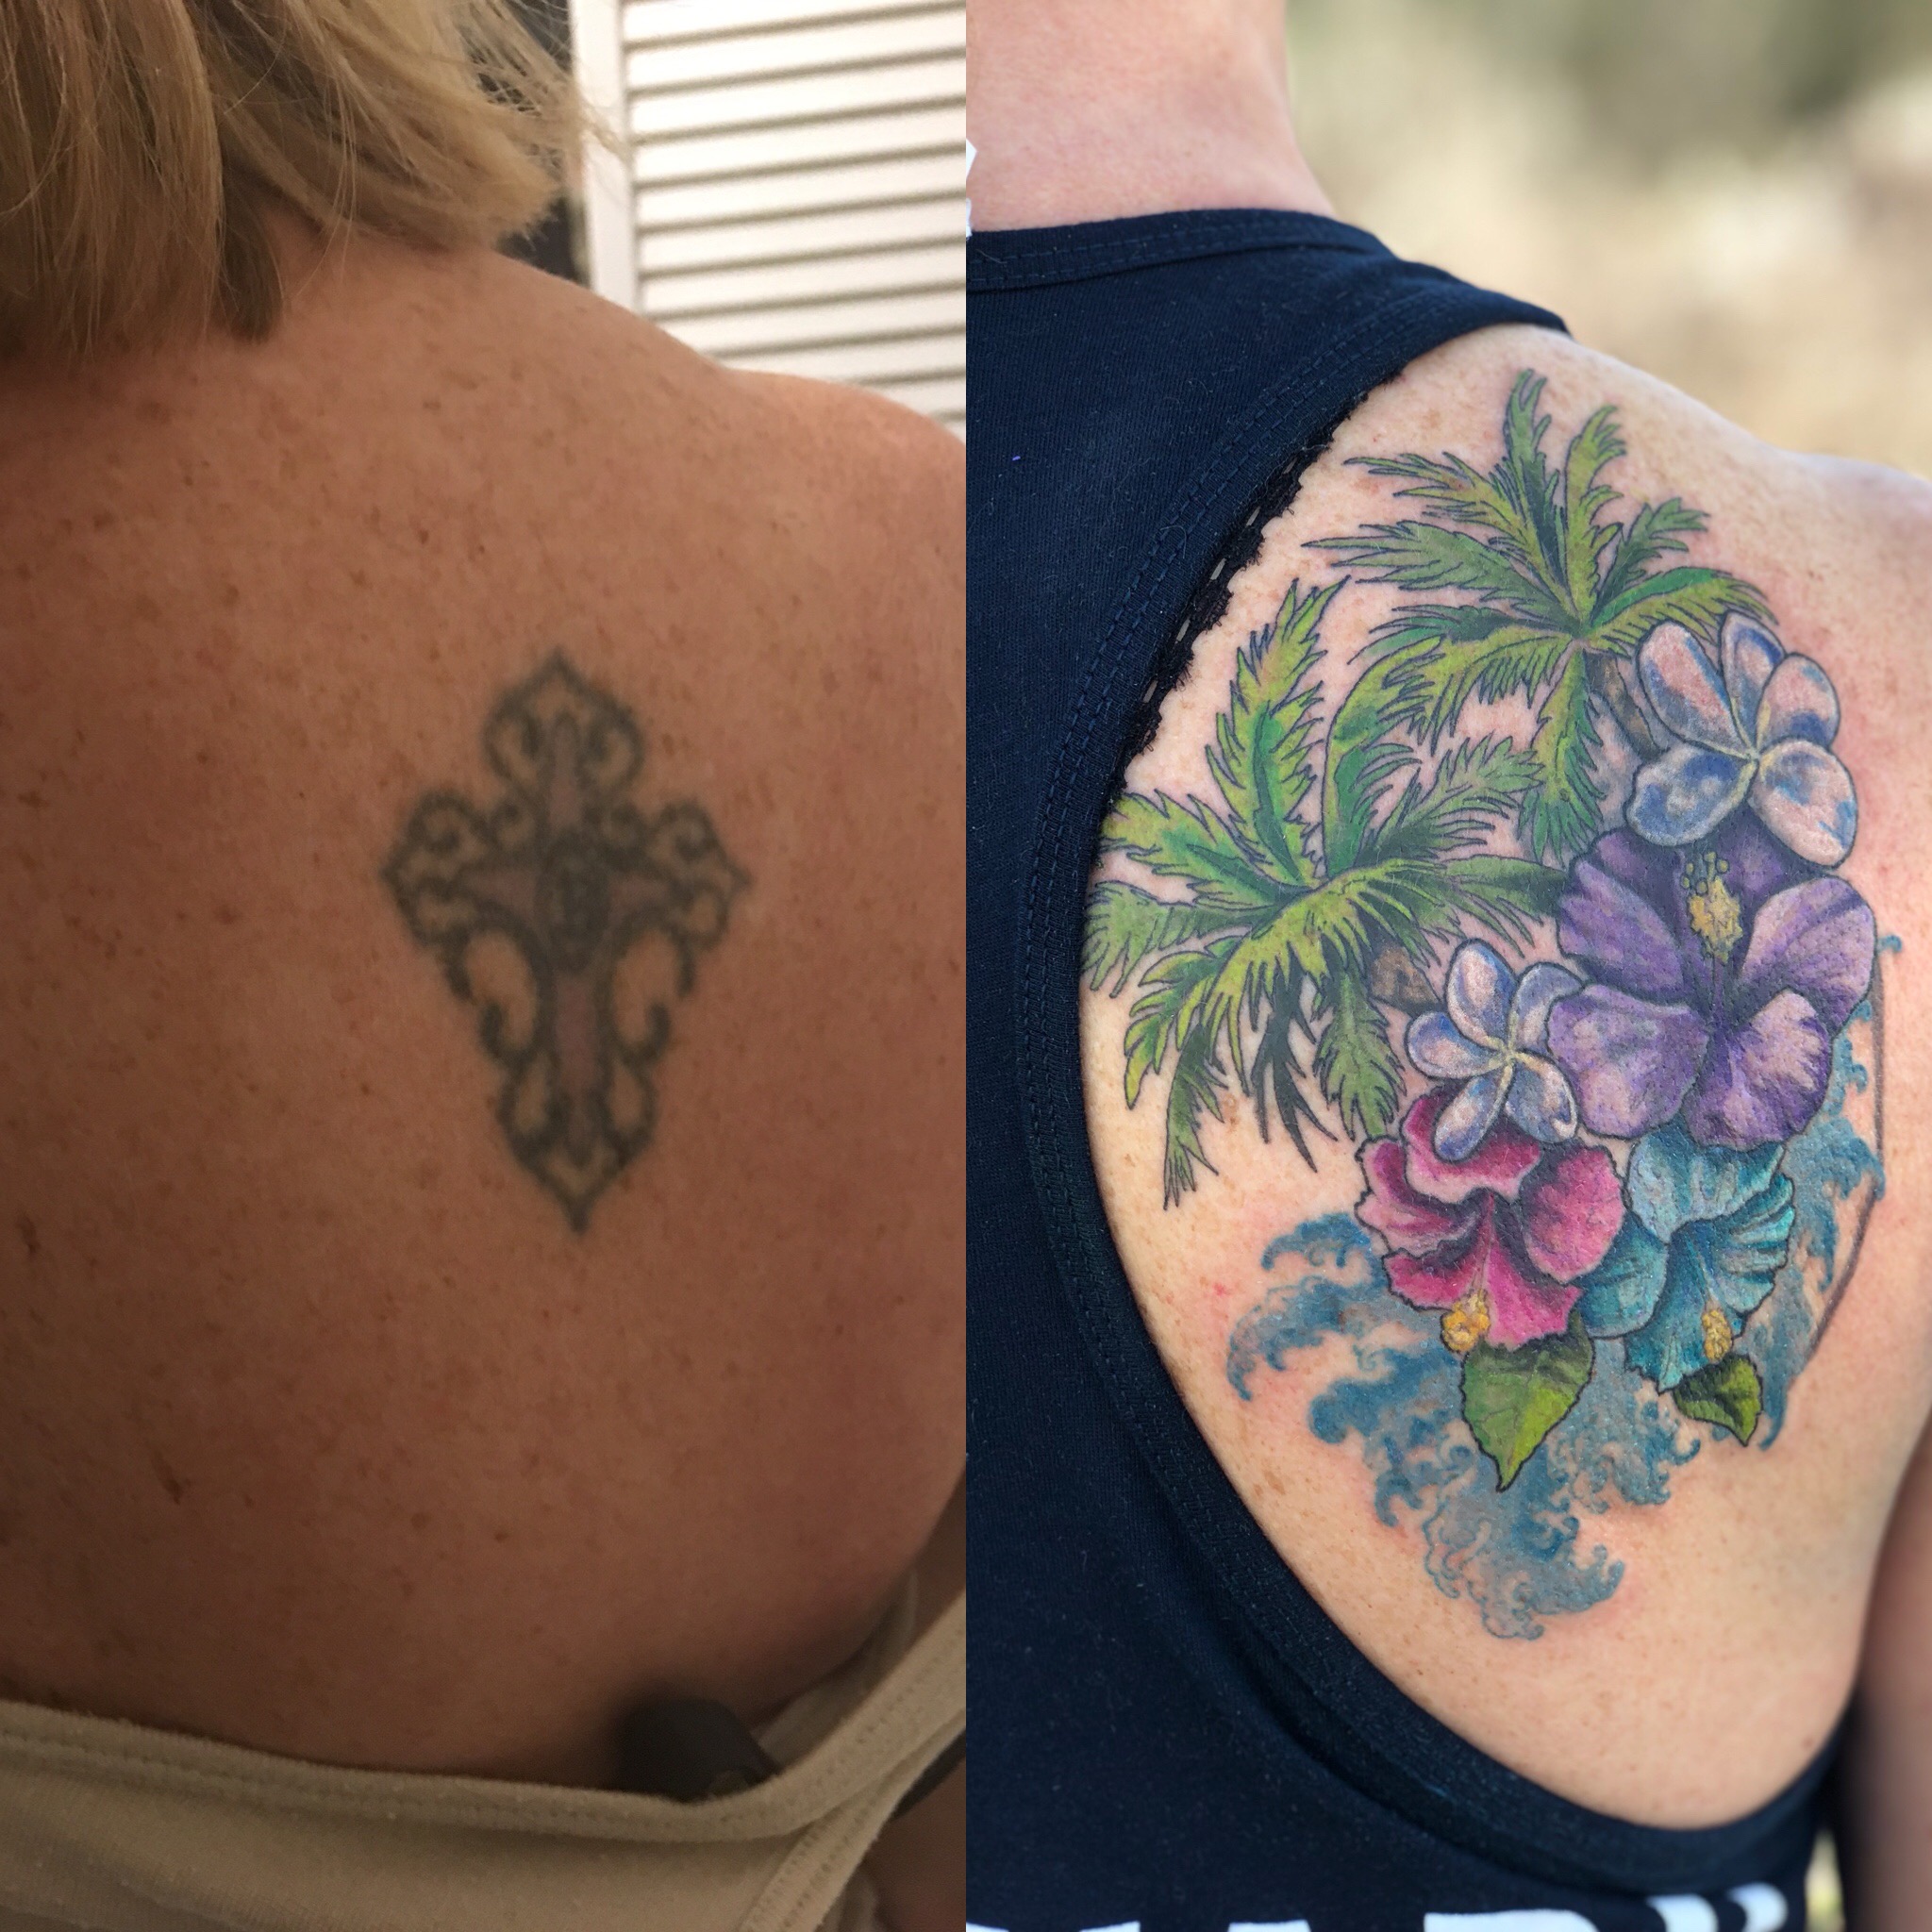 What to Put on a New Tattoo? (Complete Guide) - Sorry Mom